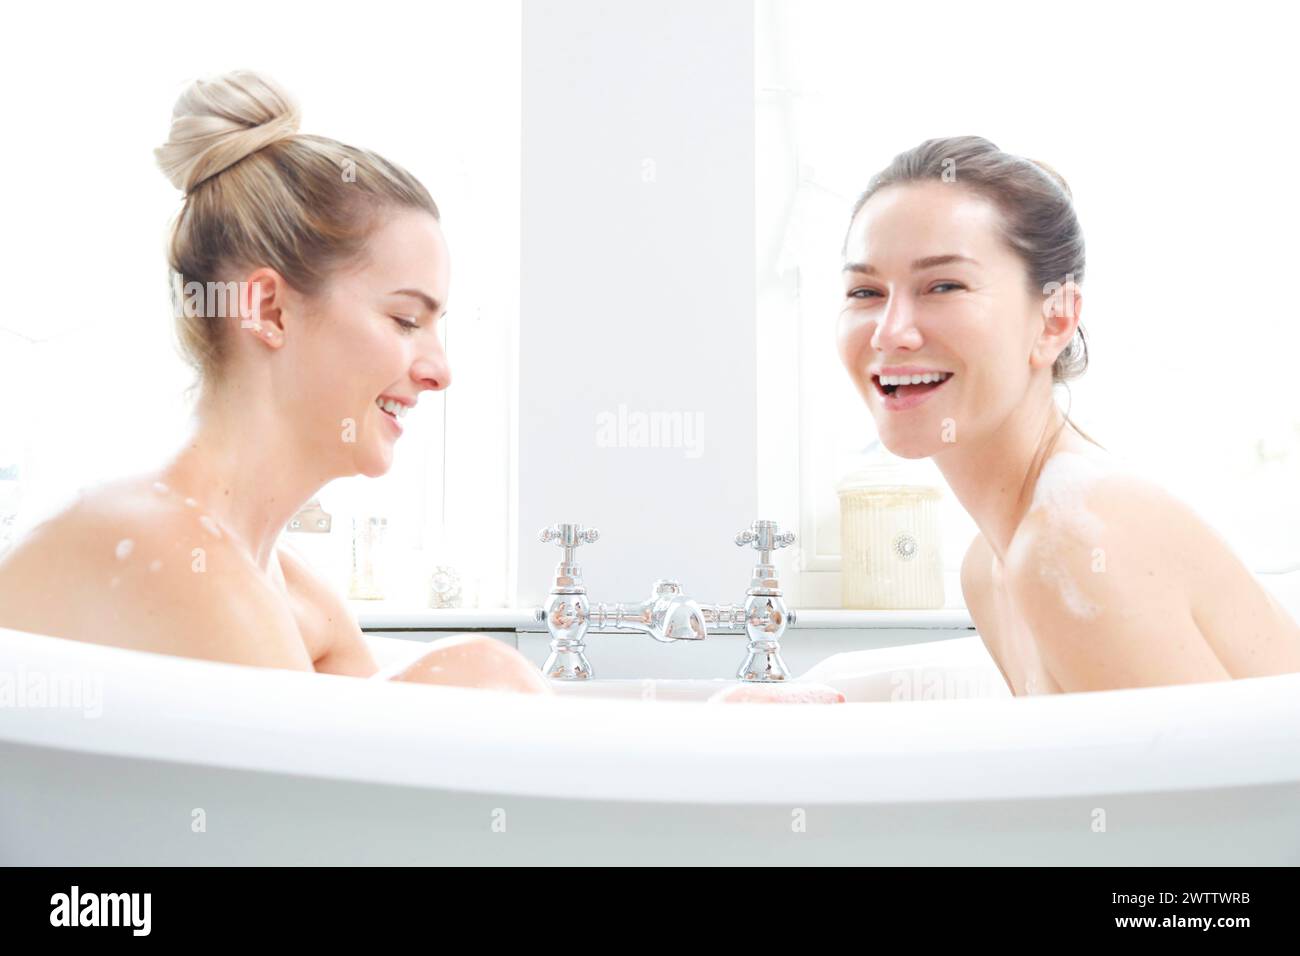 Two women laughing in a bathtub Stock Photo